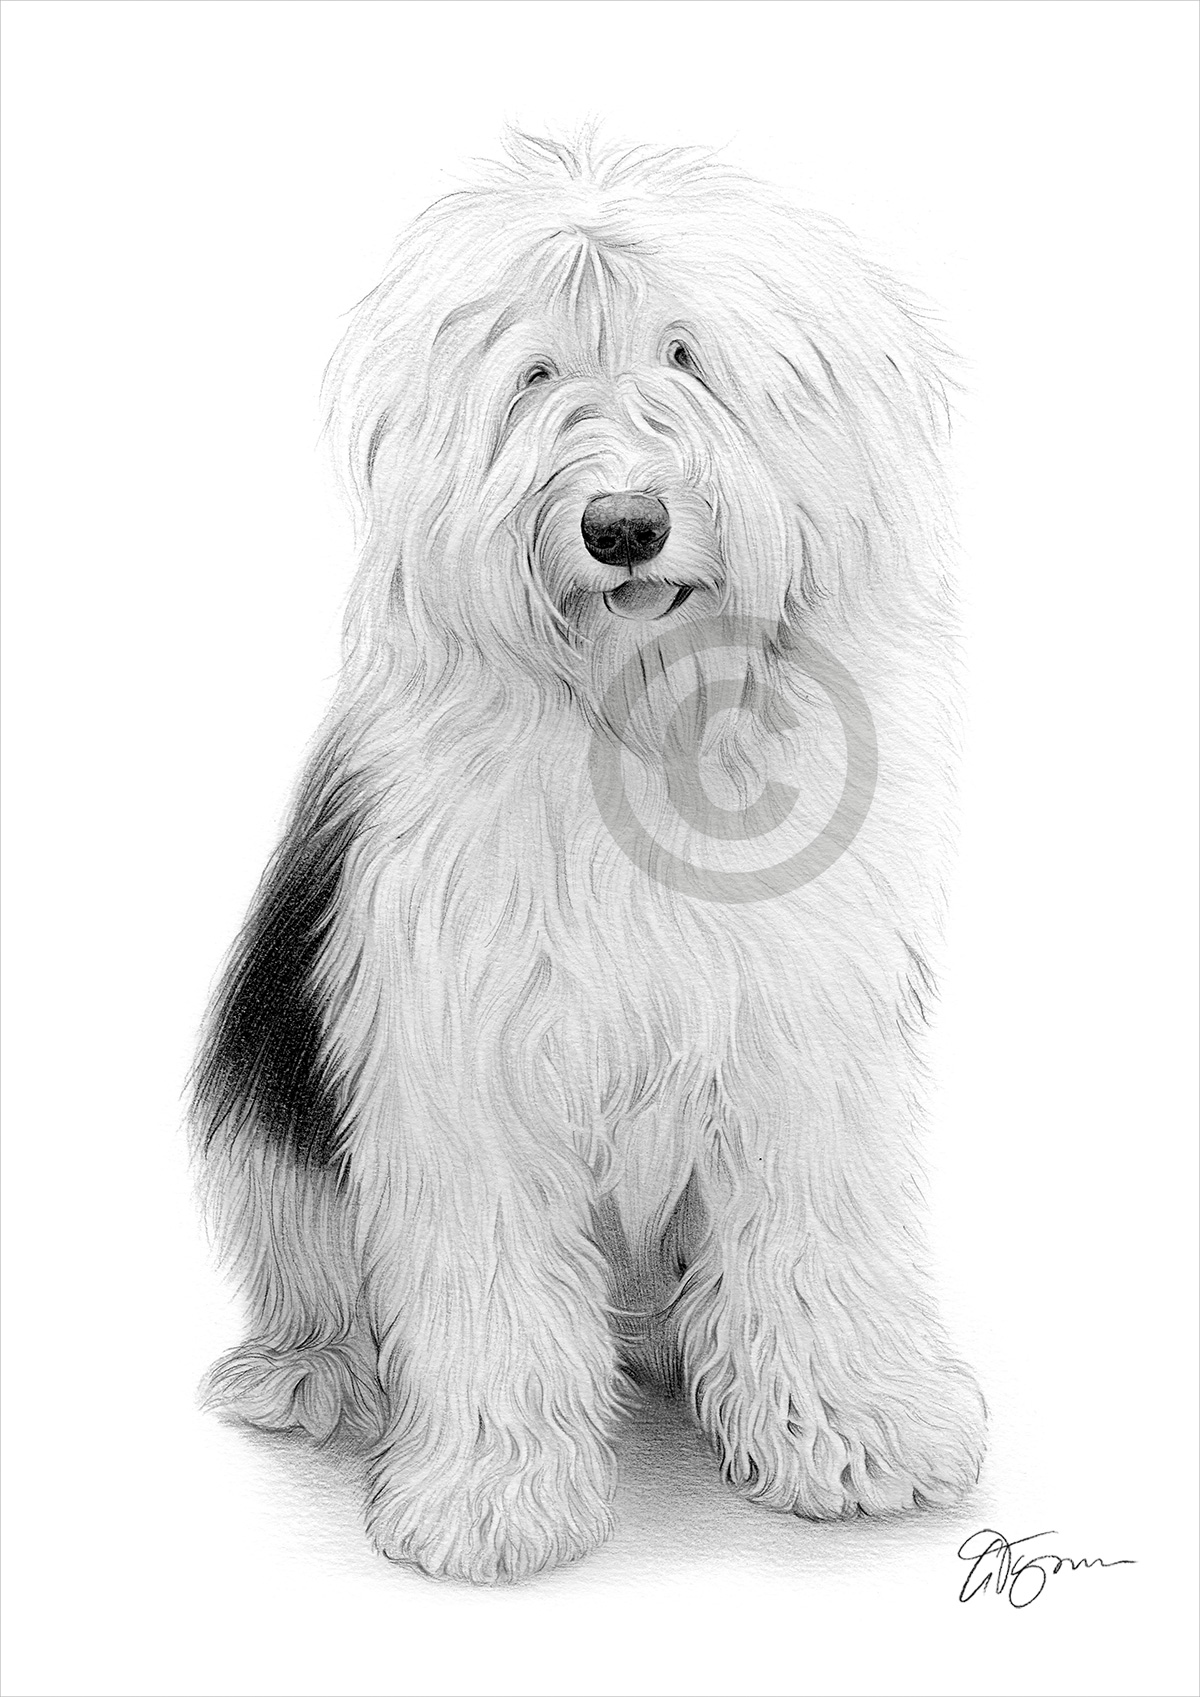 Pencil drawing of an Old English Sheepdog by artist Gary Tymon